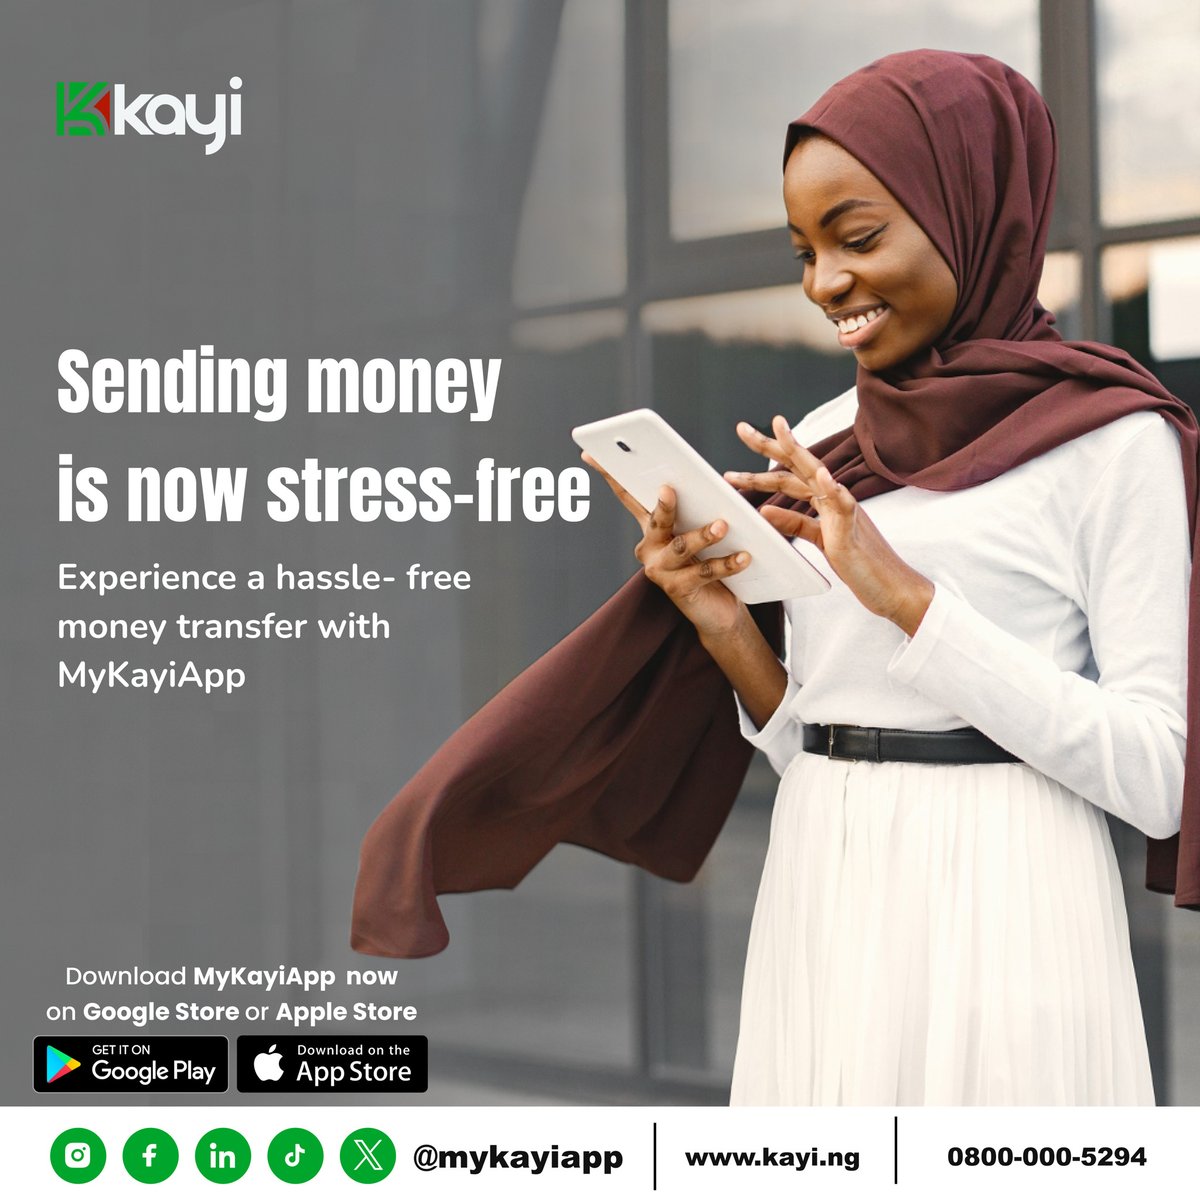 Sending money the traditional way can be a hassle. With Kayiapp, it's as easy as a few taps on your phone! Say goodbye to long queues and paperwork. Try Kayiapp today and experience hassle-free money transfers!

#EasyMoney #MyKayiapp #NoMoreHassle
#Kayiway
#Digitalbanking